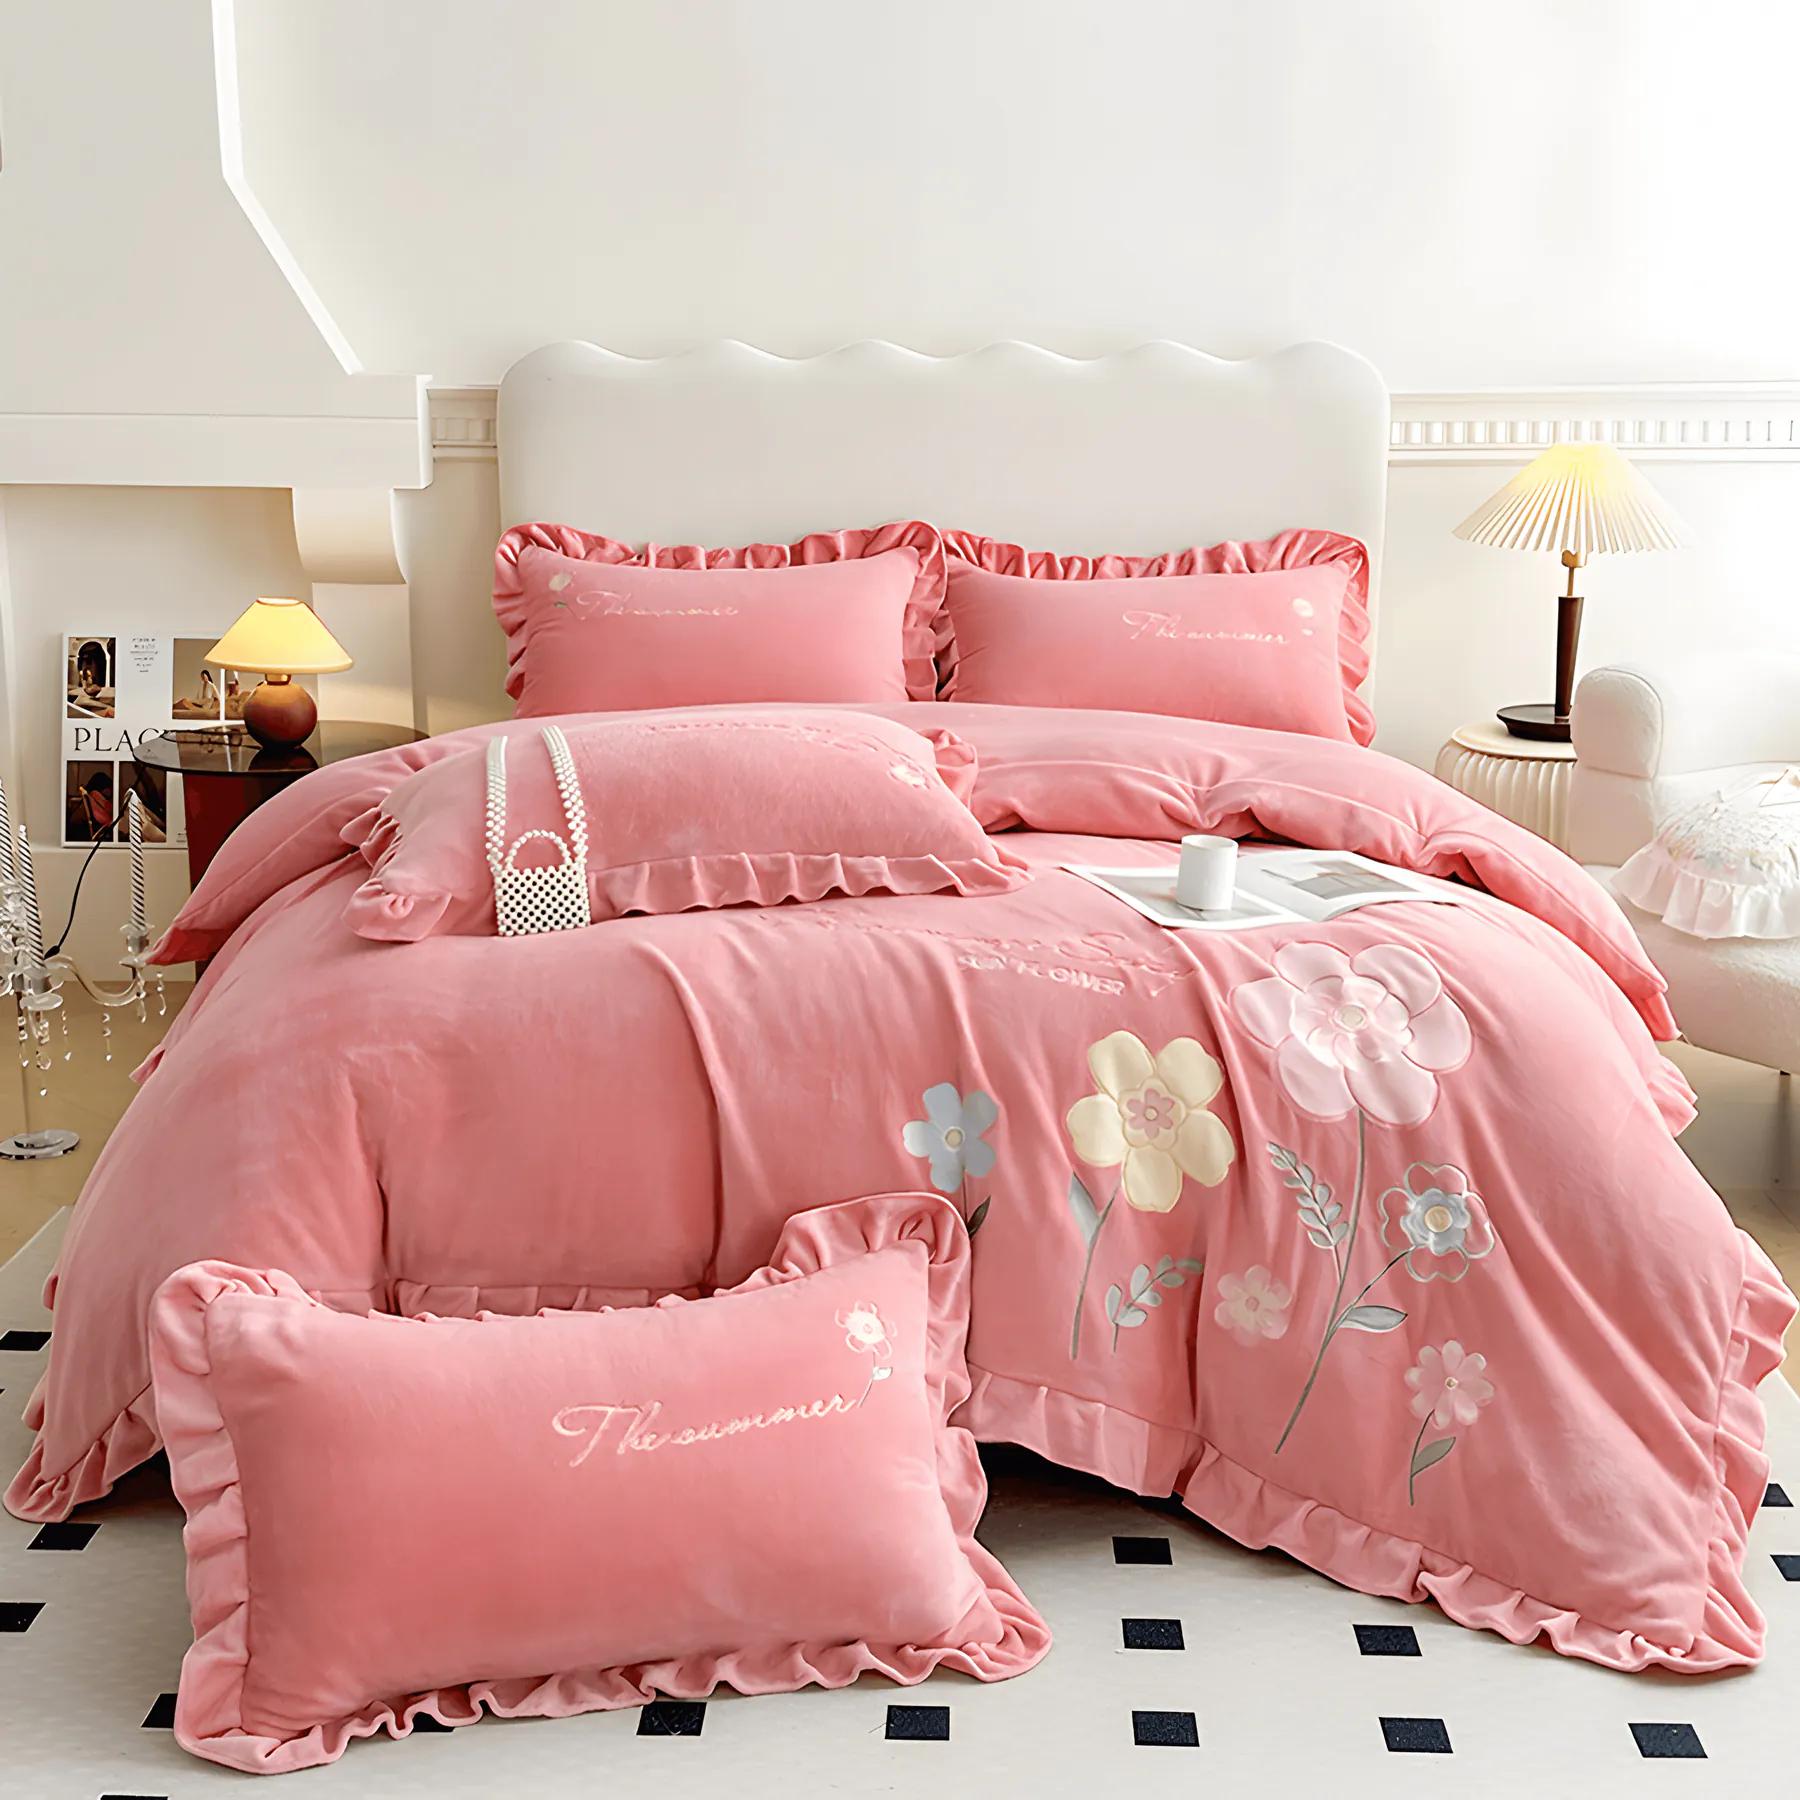 Comfy Milk Fiber Embroidery Quilt Cover Bed Sheet Pillowcases Set02